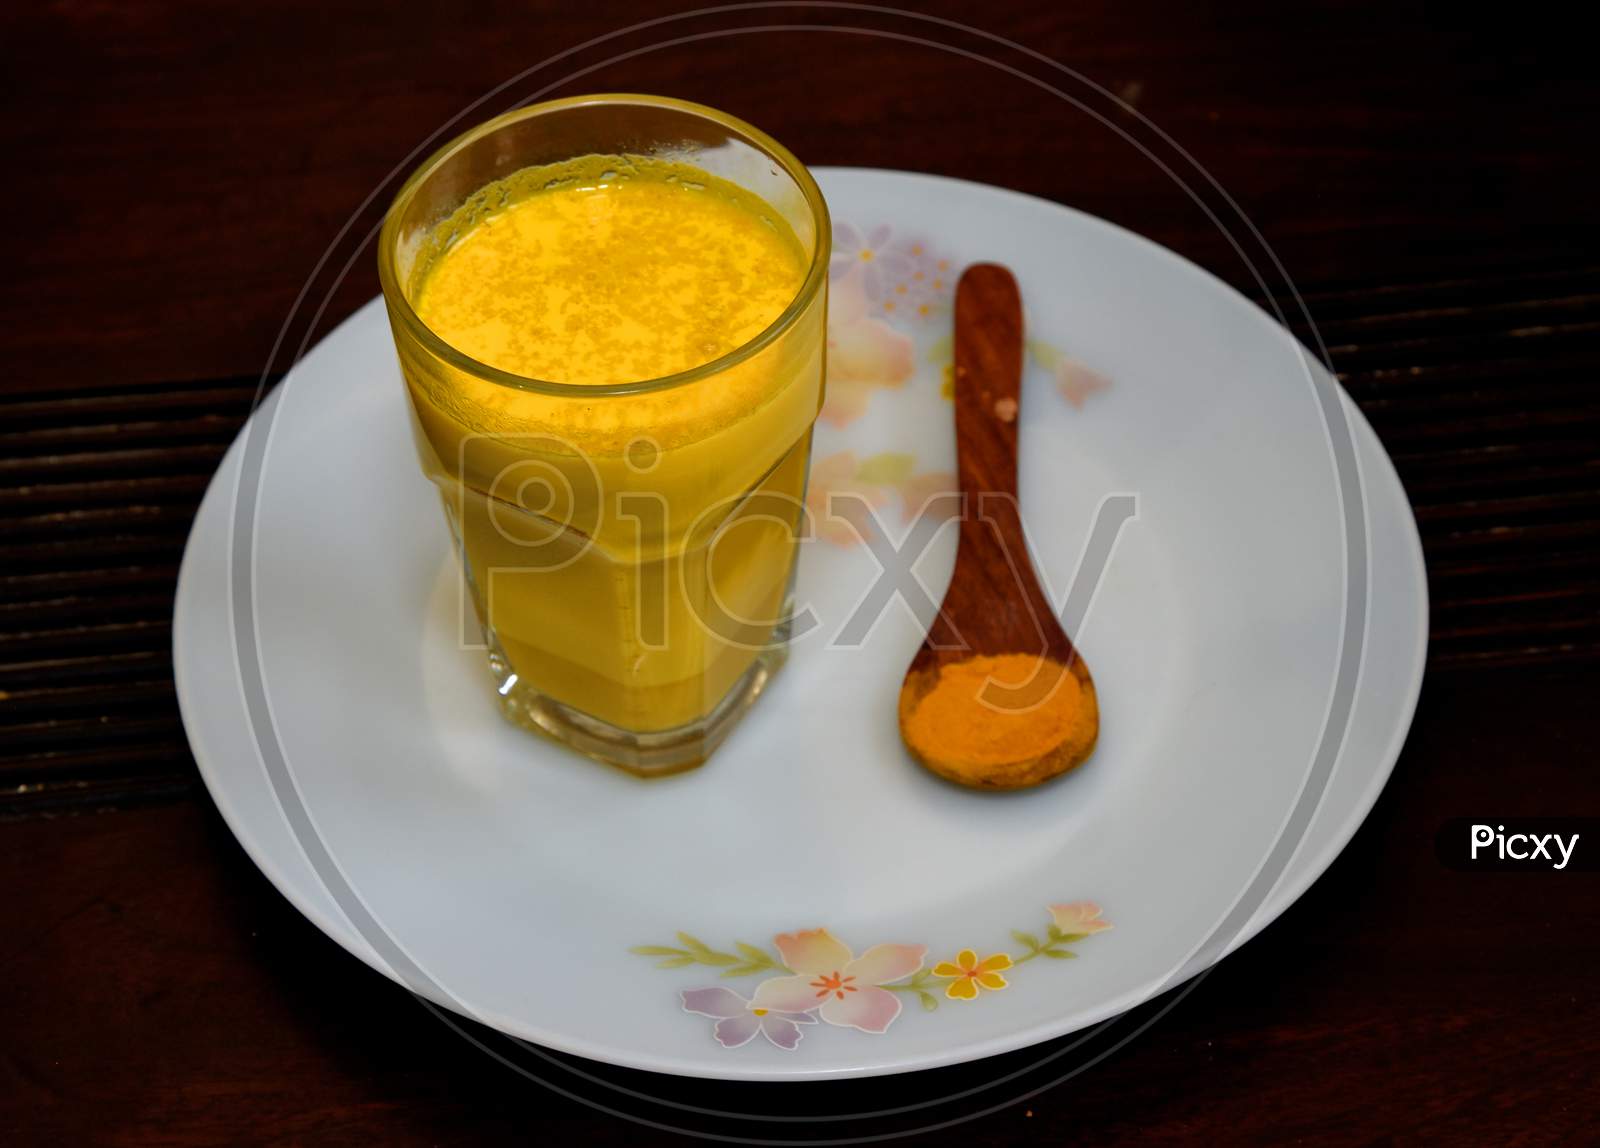 Turmeric Milk in a Glass With a Spoon of Turmeric Powder